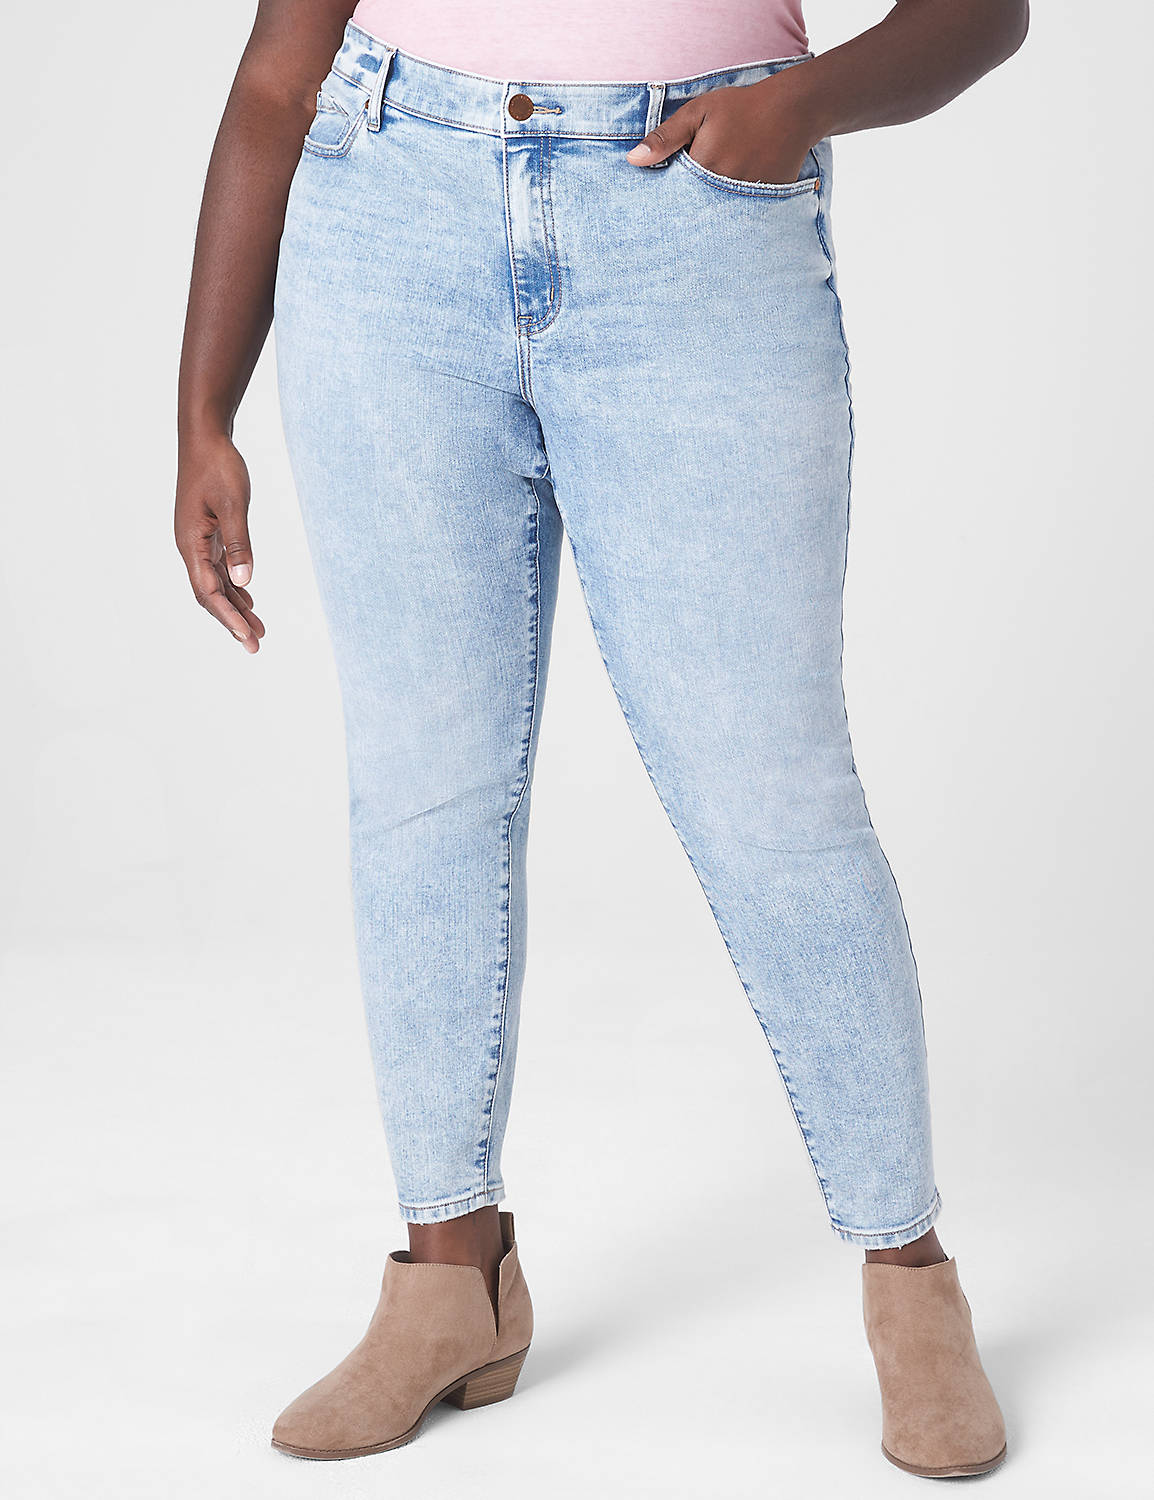 SIGNATURE FIT MID RISE SKINNY - BAC Product Image 1